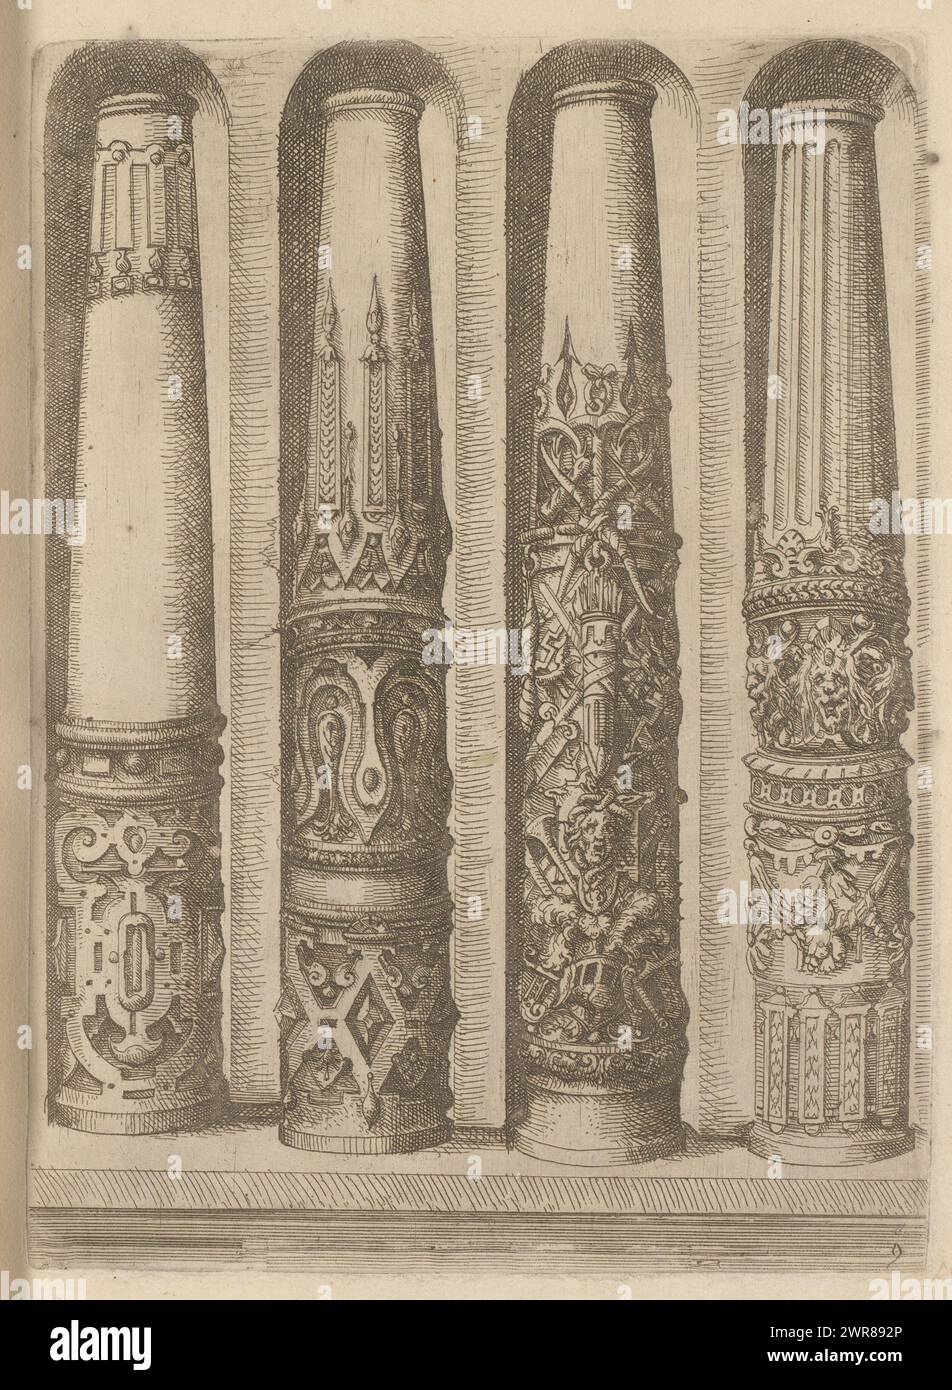 Four shafts of Doric columns decorated with rustication, trophies of arms, mascarons and garlands, Architectura (series title), Numbered: 9. Print is part of a book., print maker: Wendel Dietterlin (I), publisher: Bernhard Jobin, Straatsburg (Frankrijk), 1593 - 1595, paper, etching, height 251 mm × width 182 mm Stock Photo